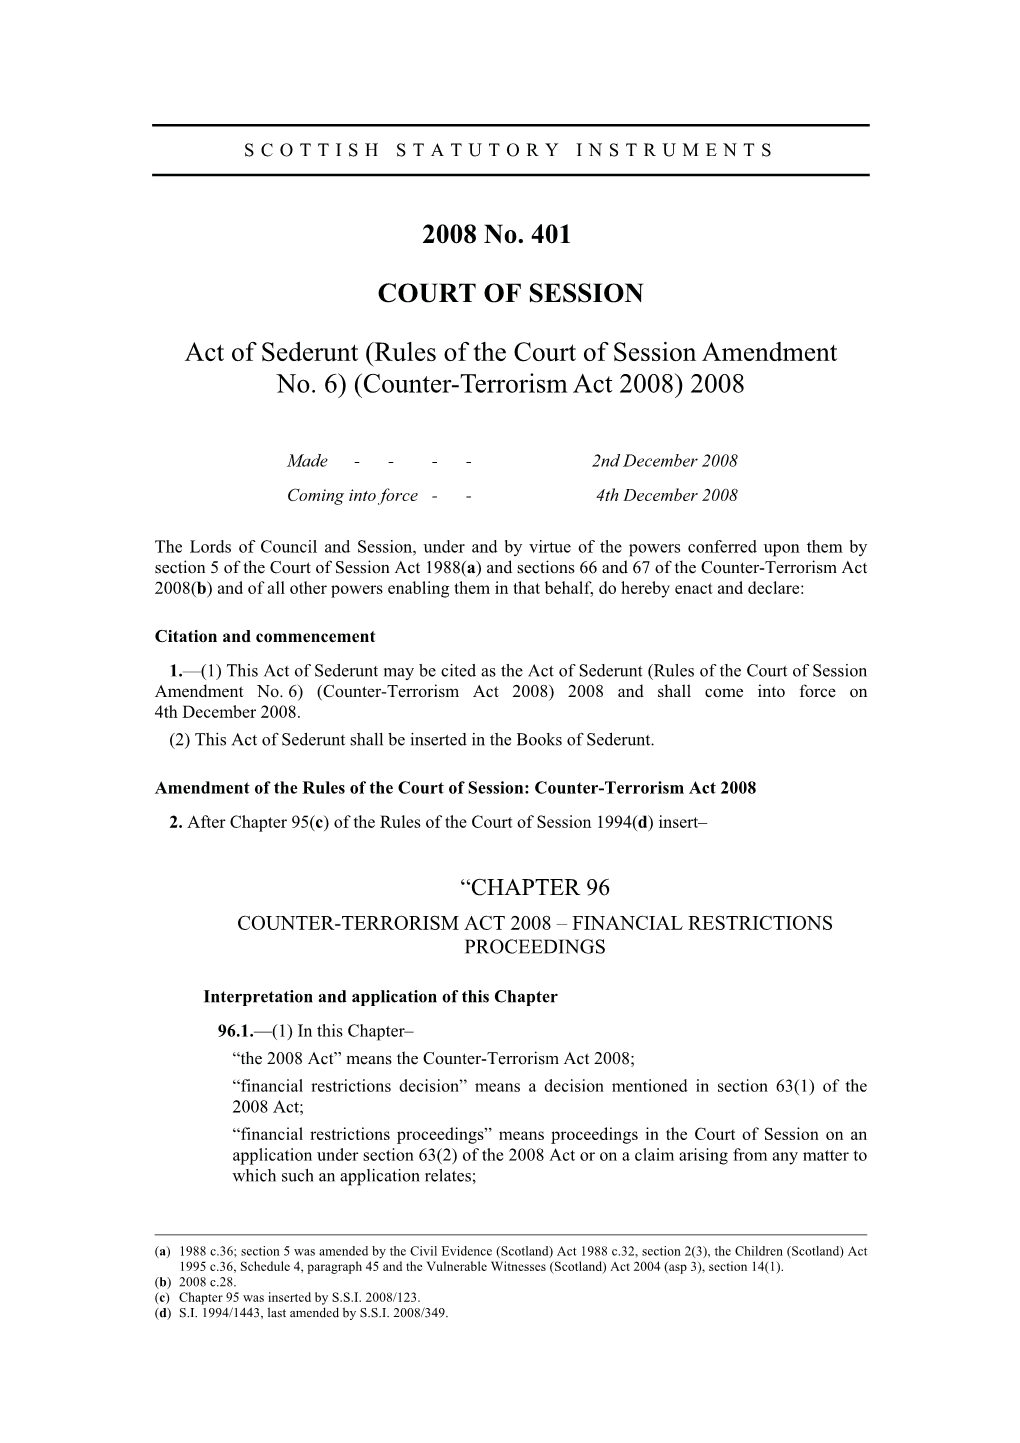 2008 No. 401 COURT of SESSION Act of Sederunt (Rules of the Court